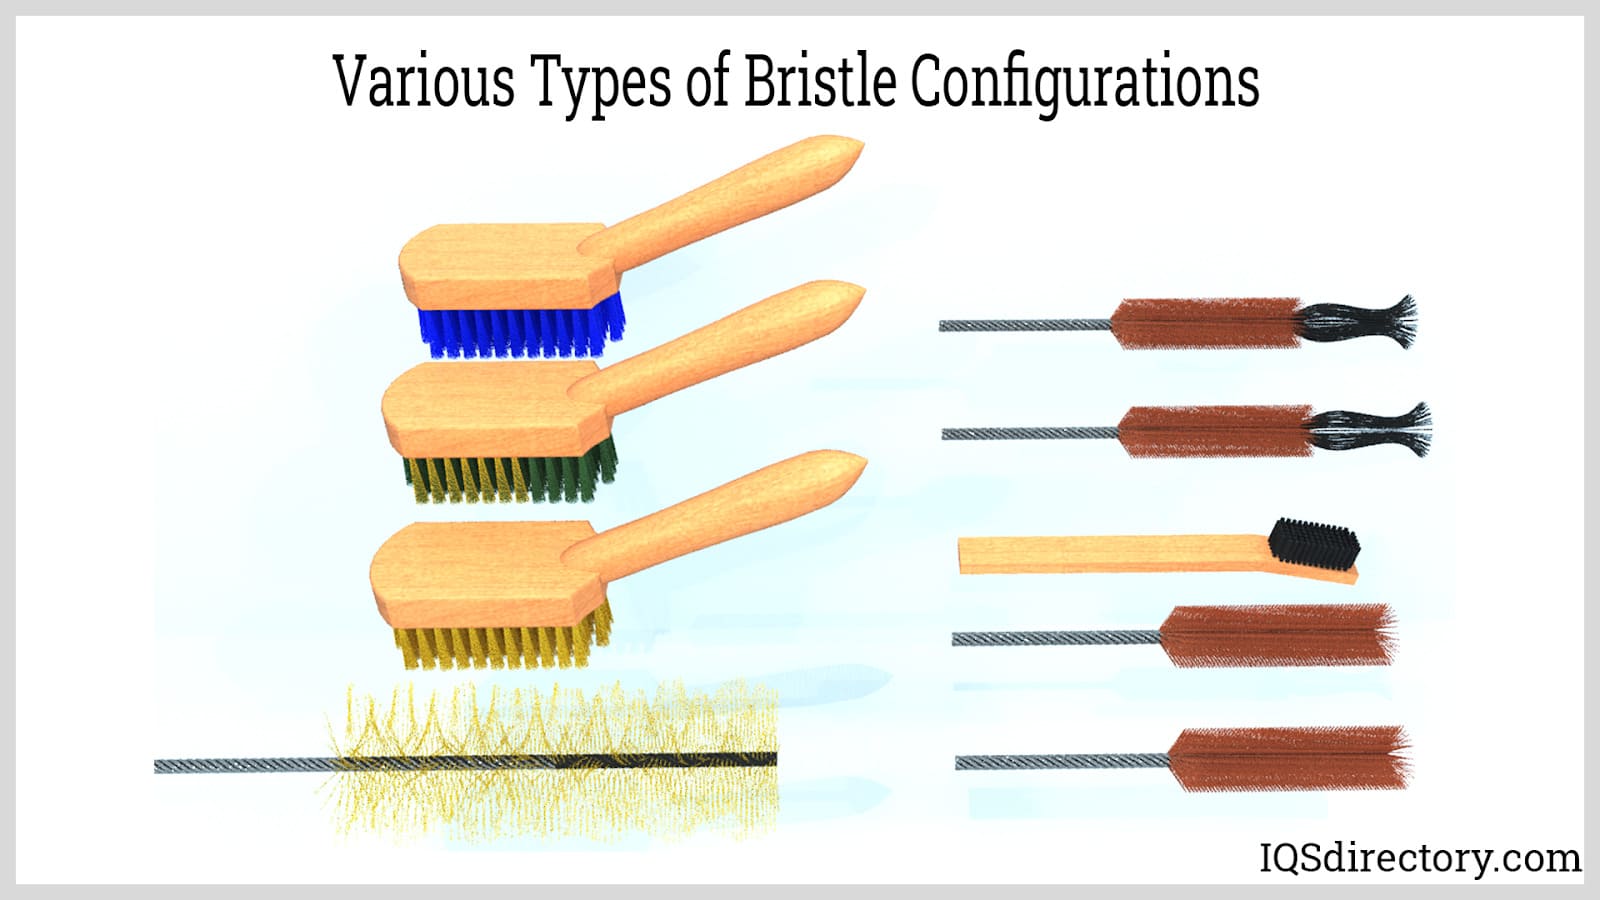 https://www.iqsdirectory.com/articles/brush/cleaning-brush/various-types-of-bristle-configurations.jpg